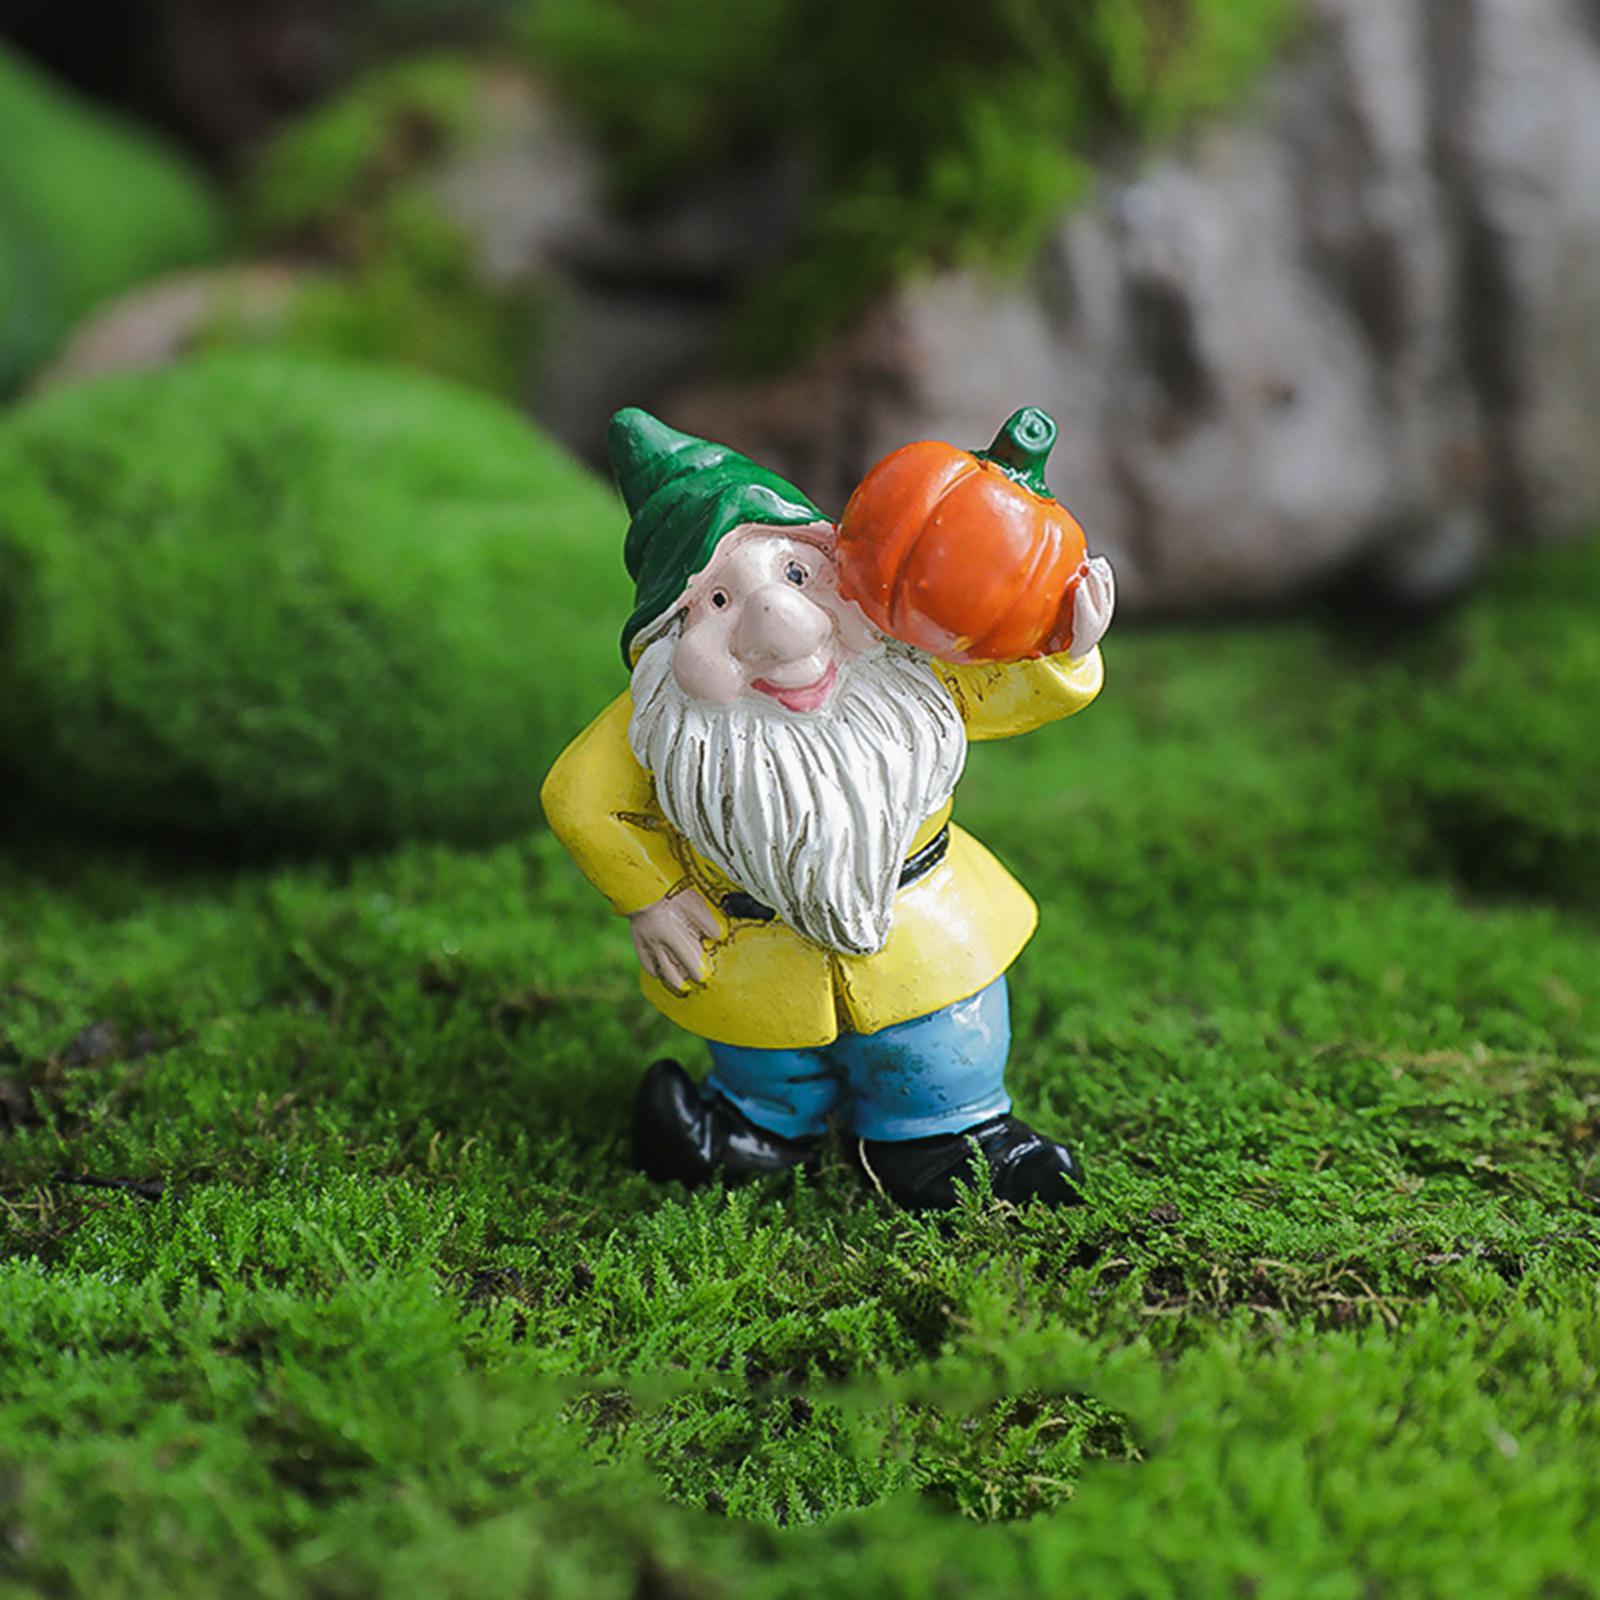 7Pcs Fairy Garden Dwarf Statues Garden Gnomes Figurines for Home Office